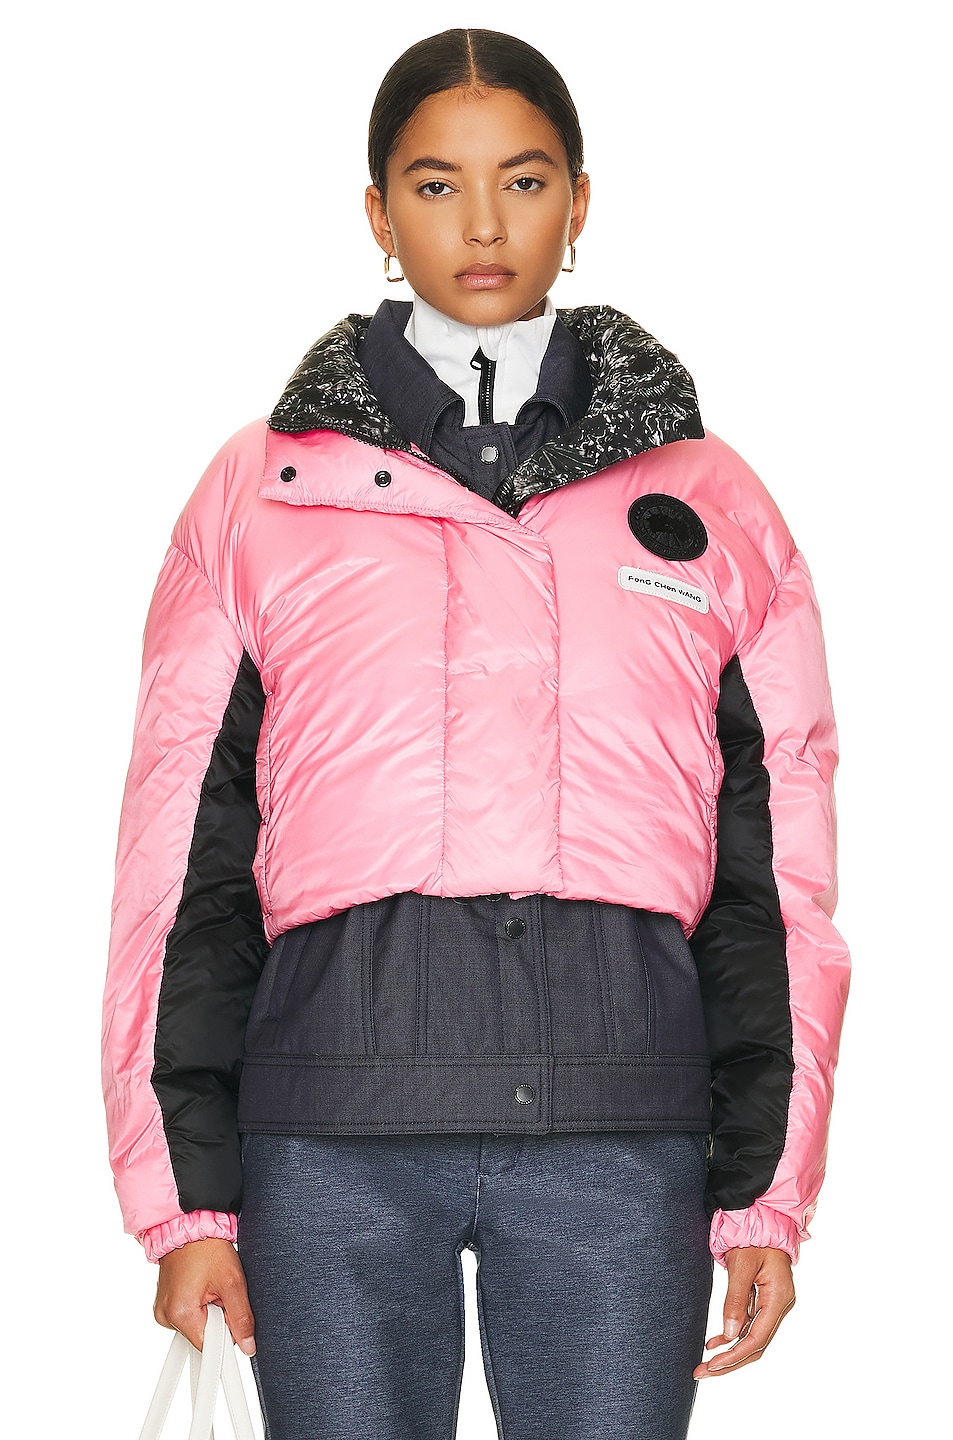 Image 1 of Canada Goose Feng Chen Wang Mercer Down Jacket in Pink Multi